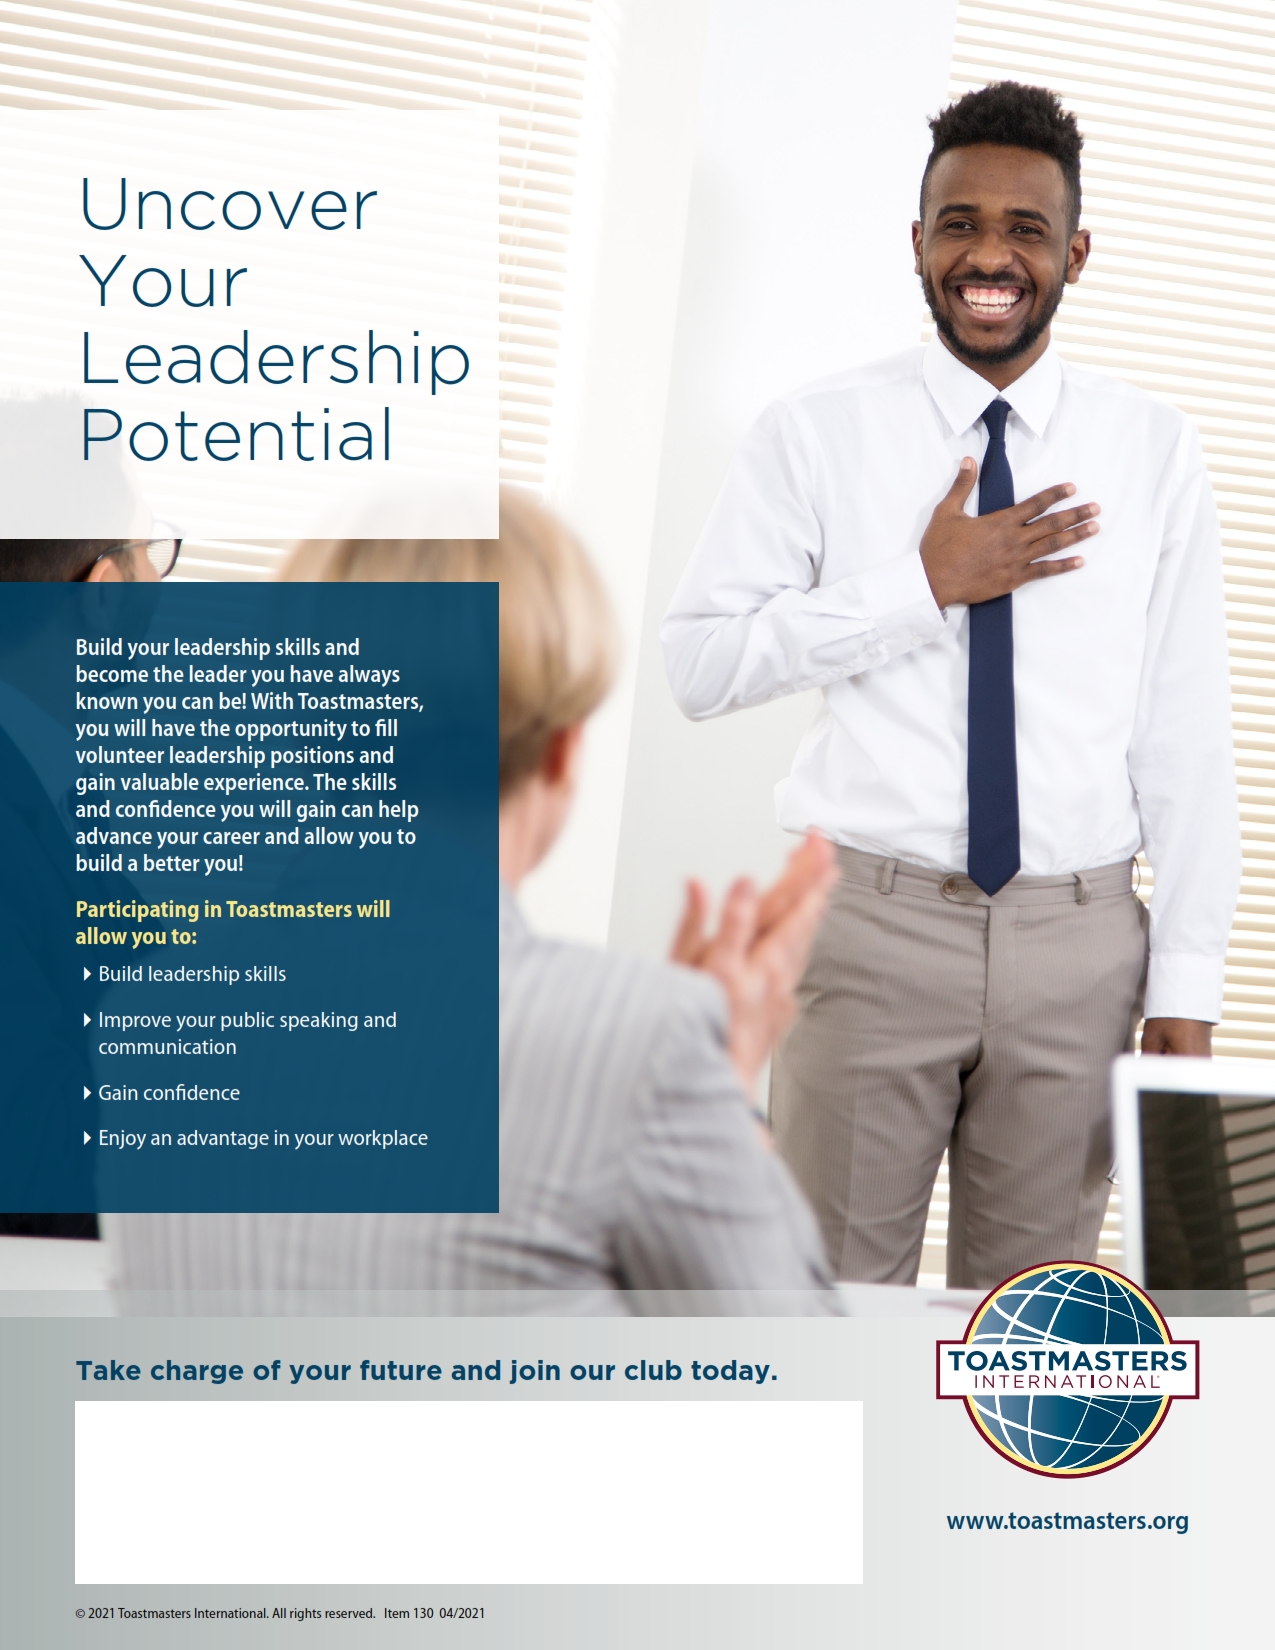 Image: TI Uncover your leadership potential flier